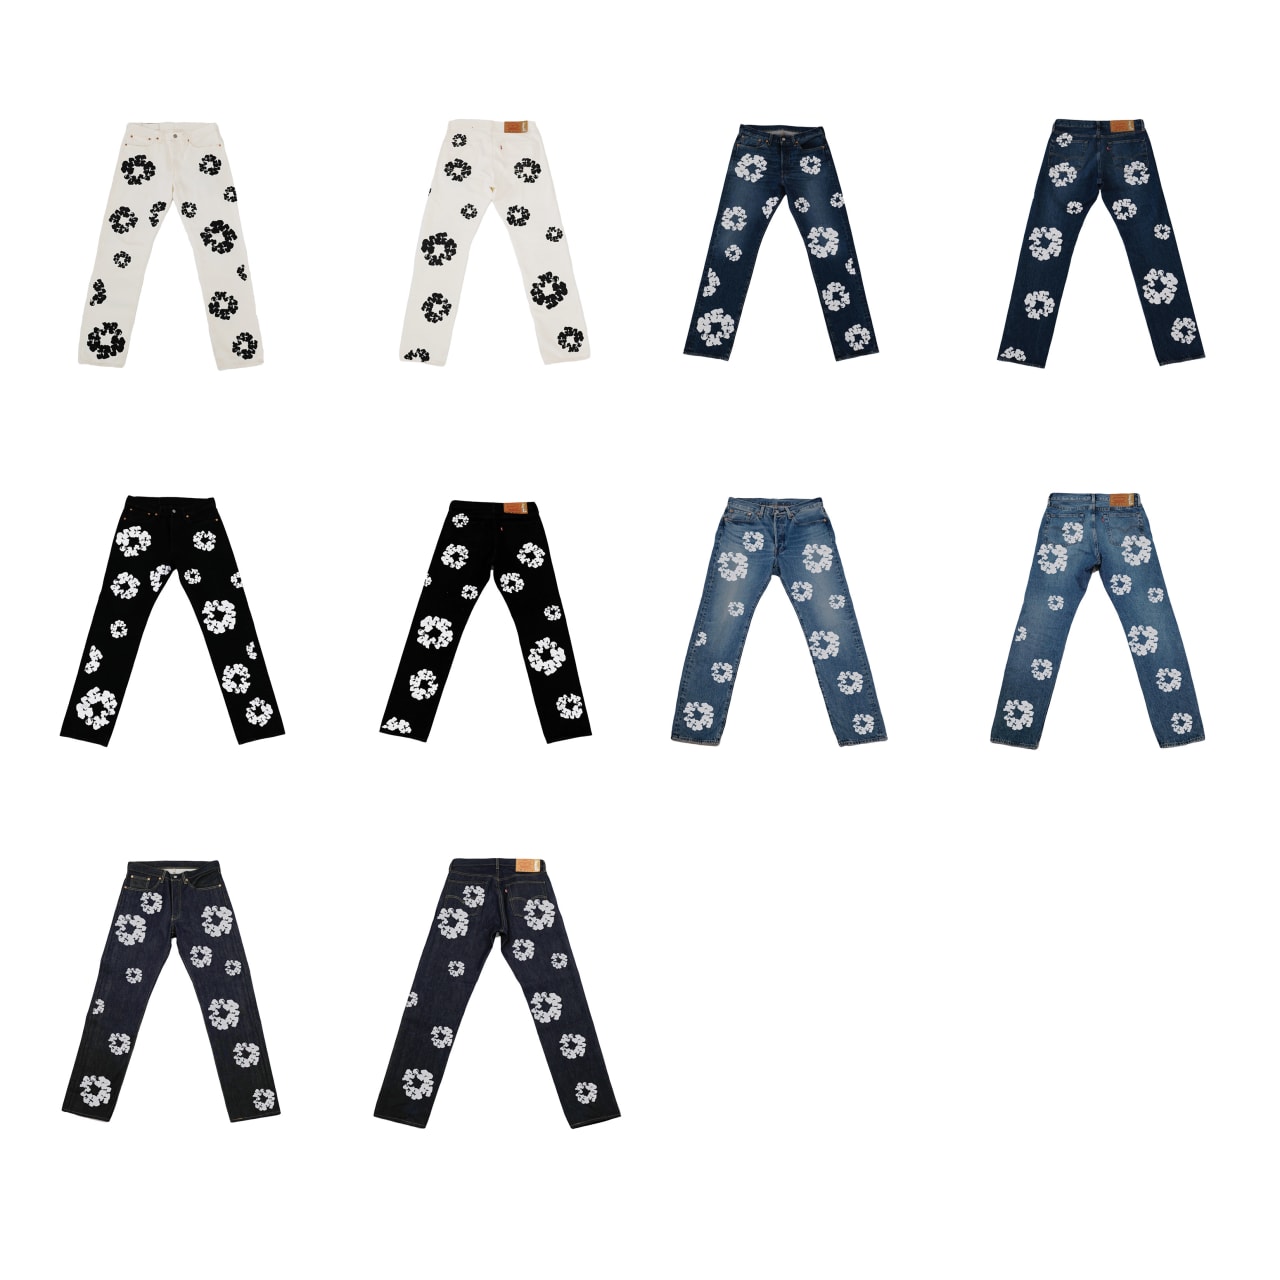 Denim Tears Dropping More Pairs of Wildly Popular Cotton Wreath Levi's |  Complex